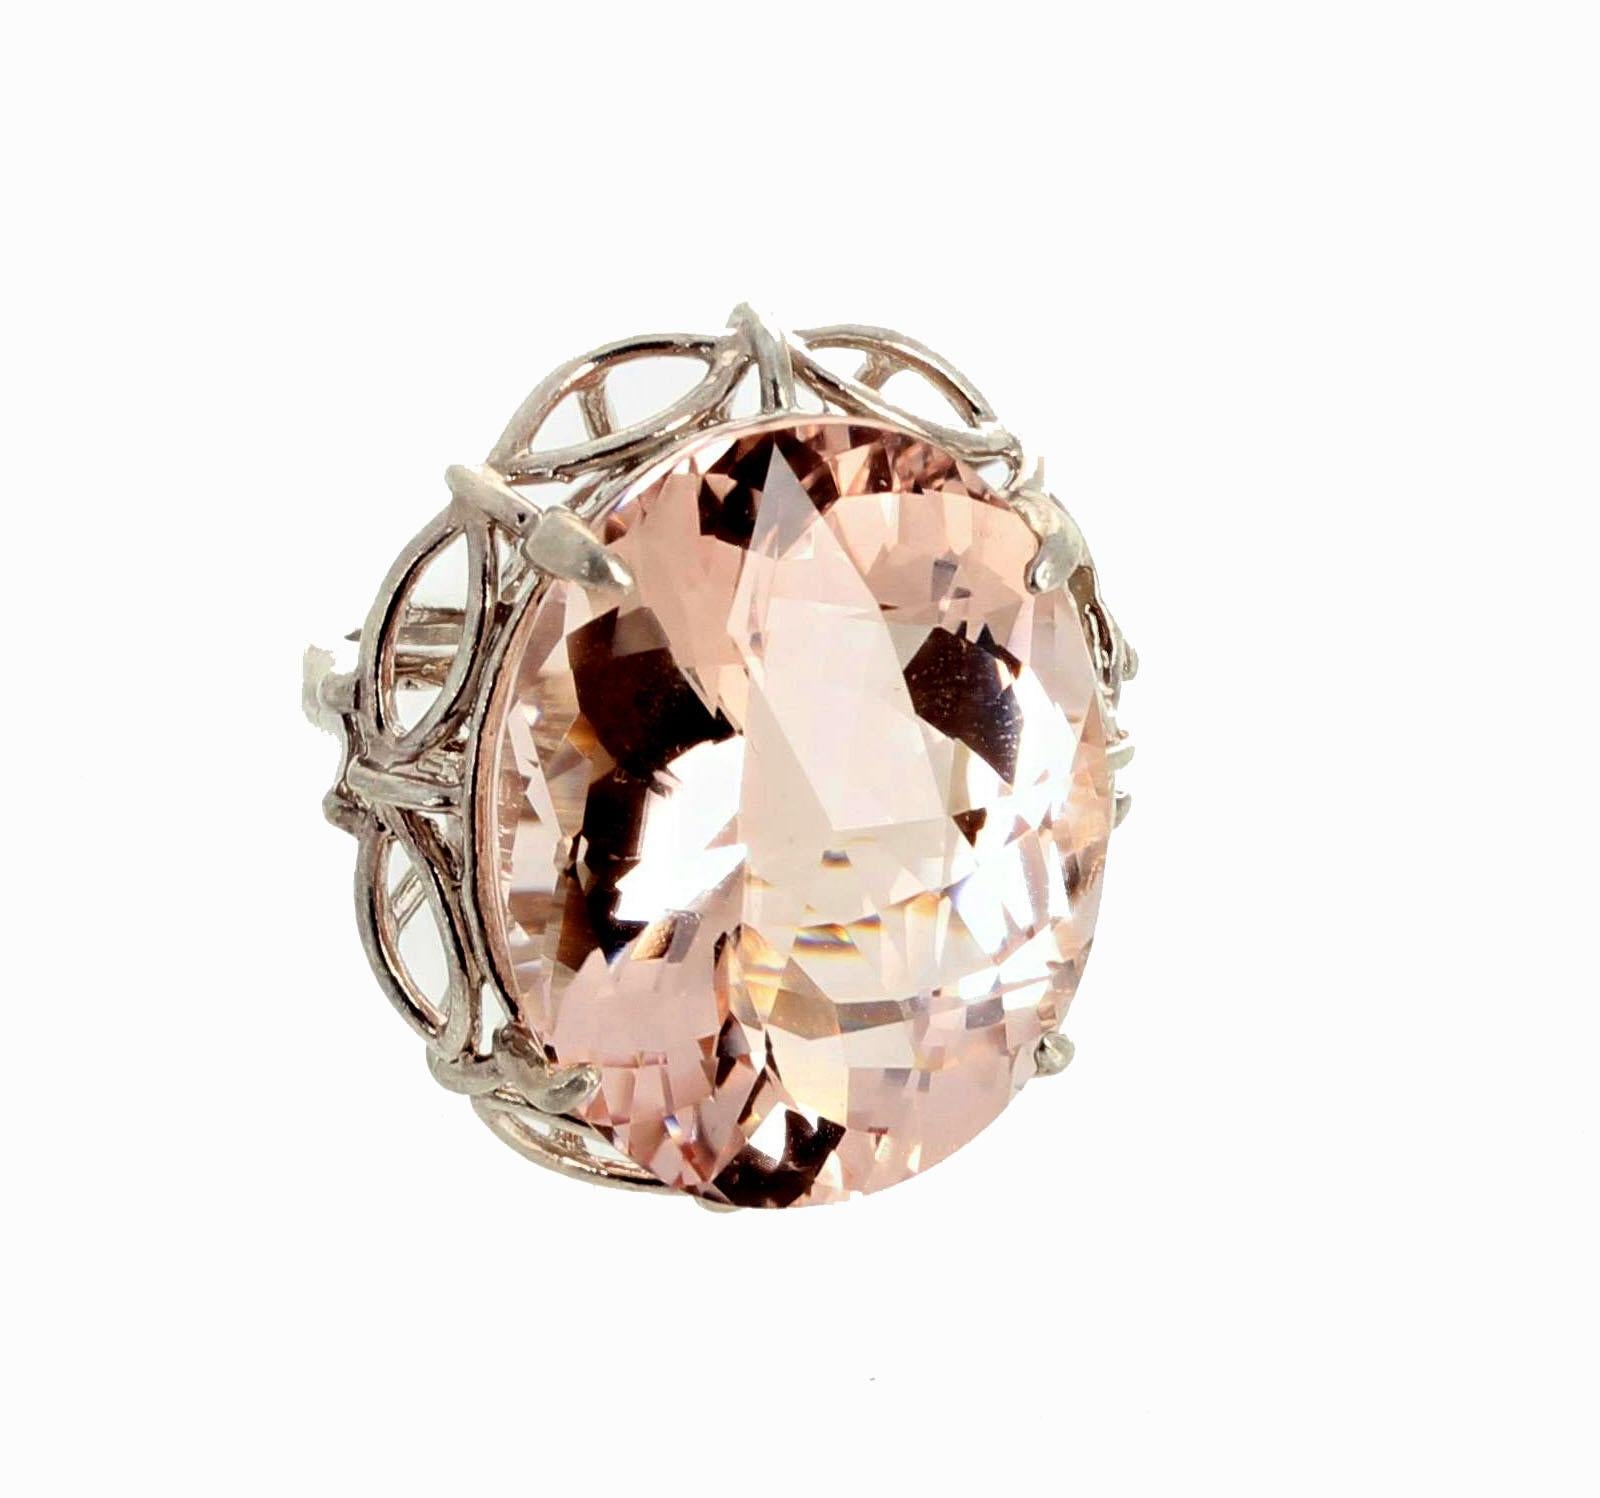 AJD Enormous Glowing Clear 30 Ct. Morganite Sterling Silver Cocktail Ring For Sale 2